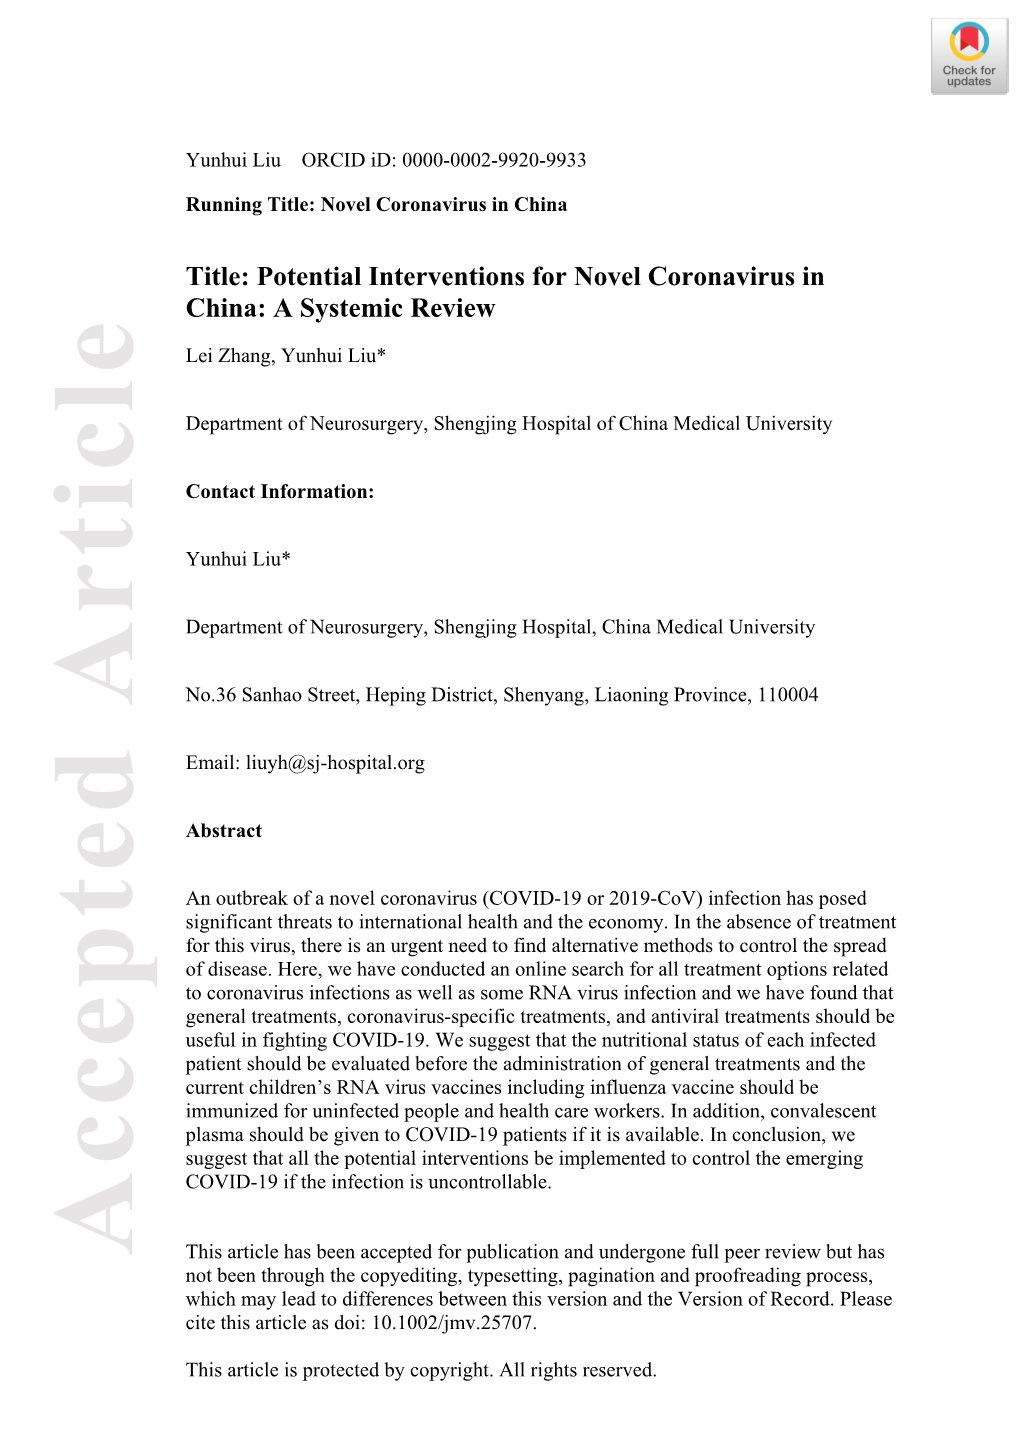 Potential Interventions for Novel Coronavirus in China